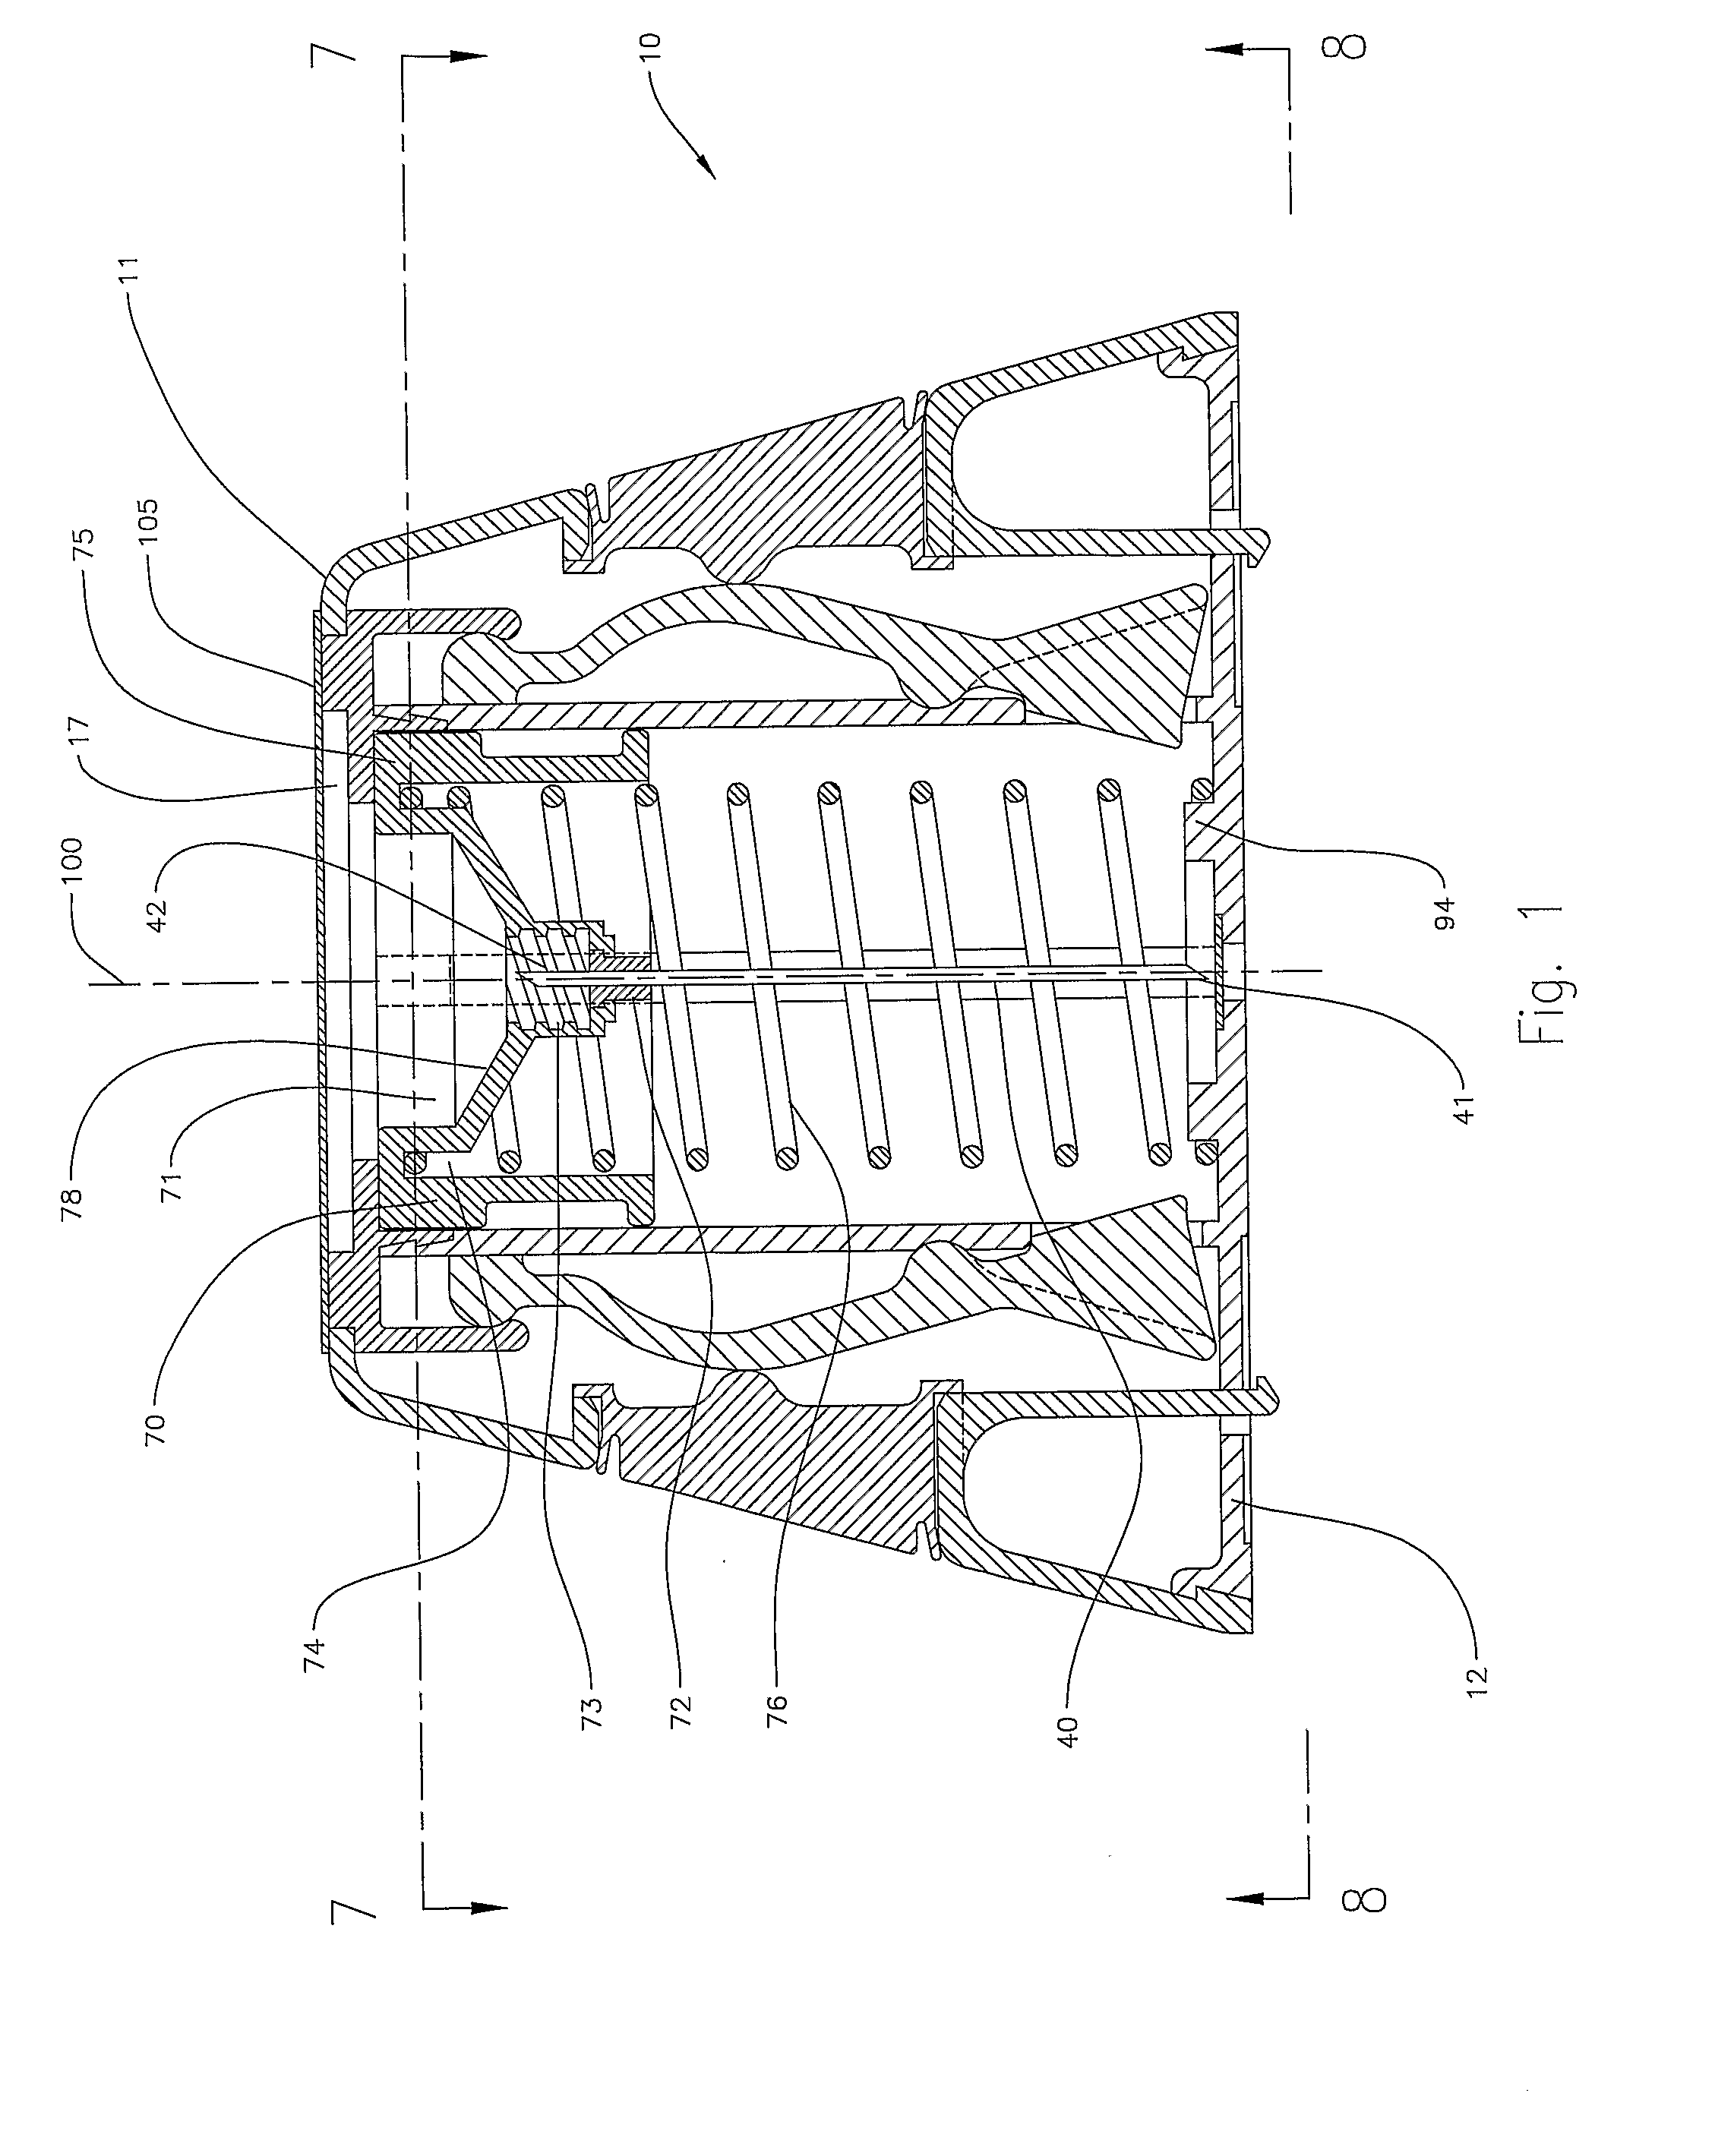 Injection Device for Administering a Vaccine